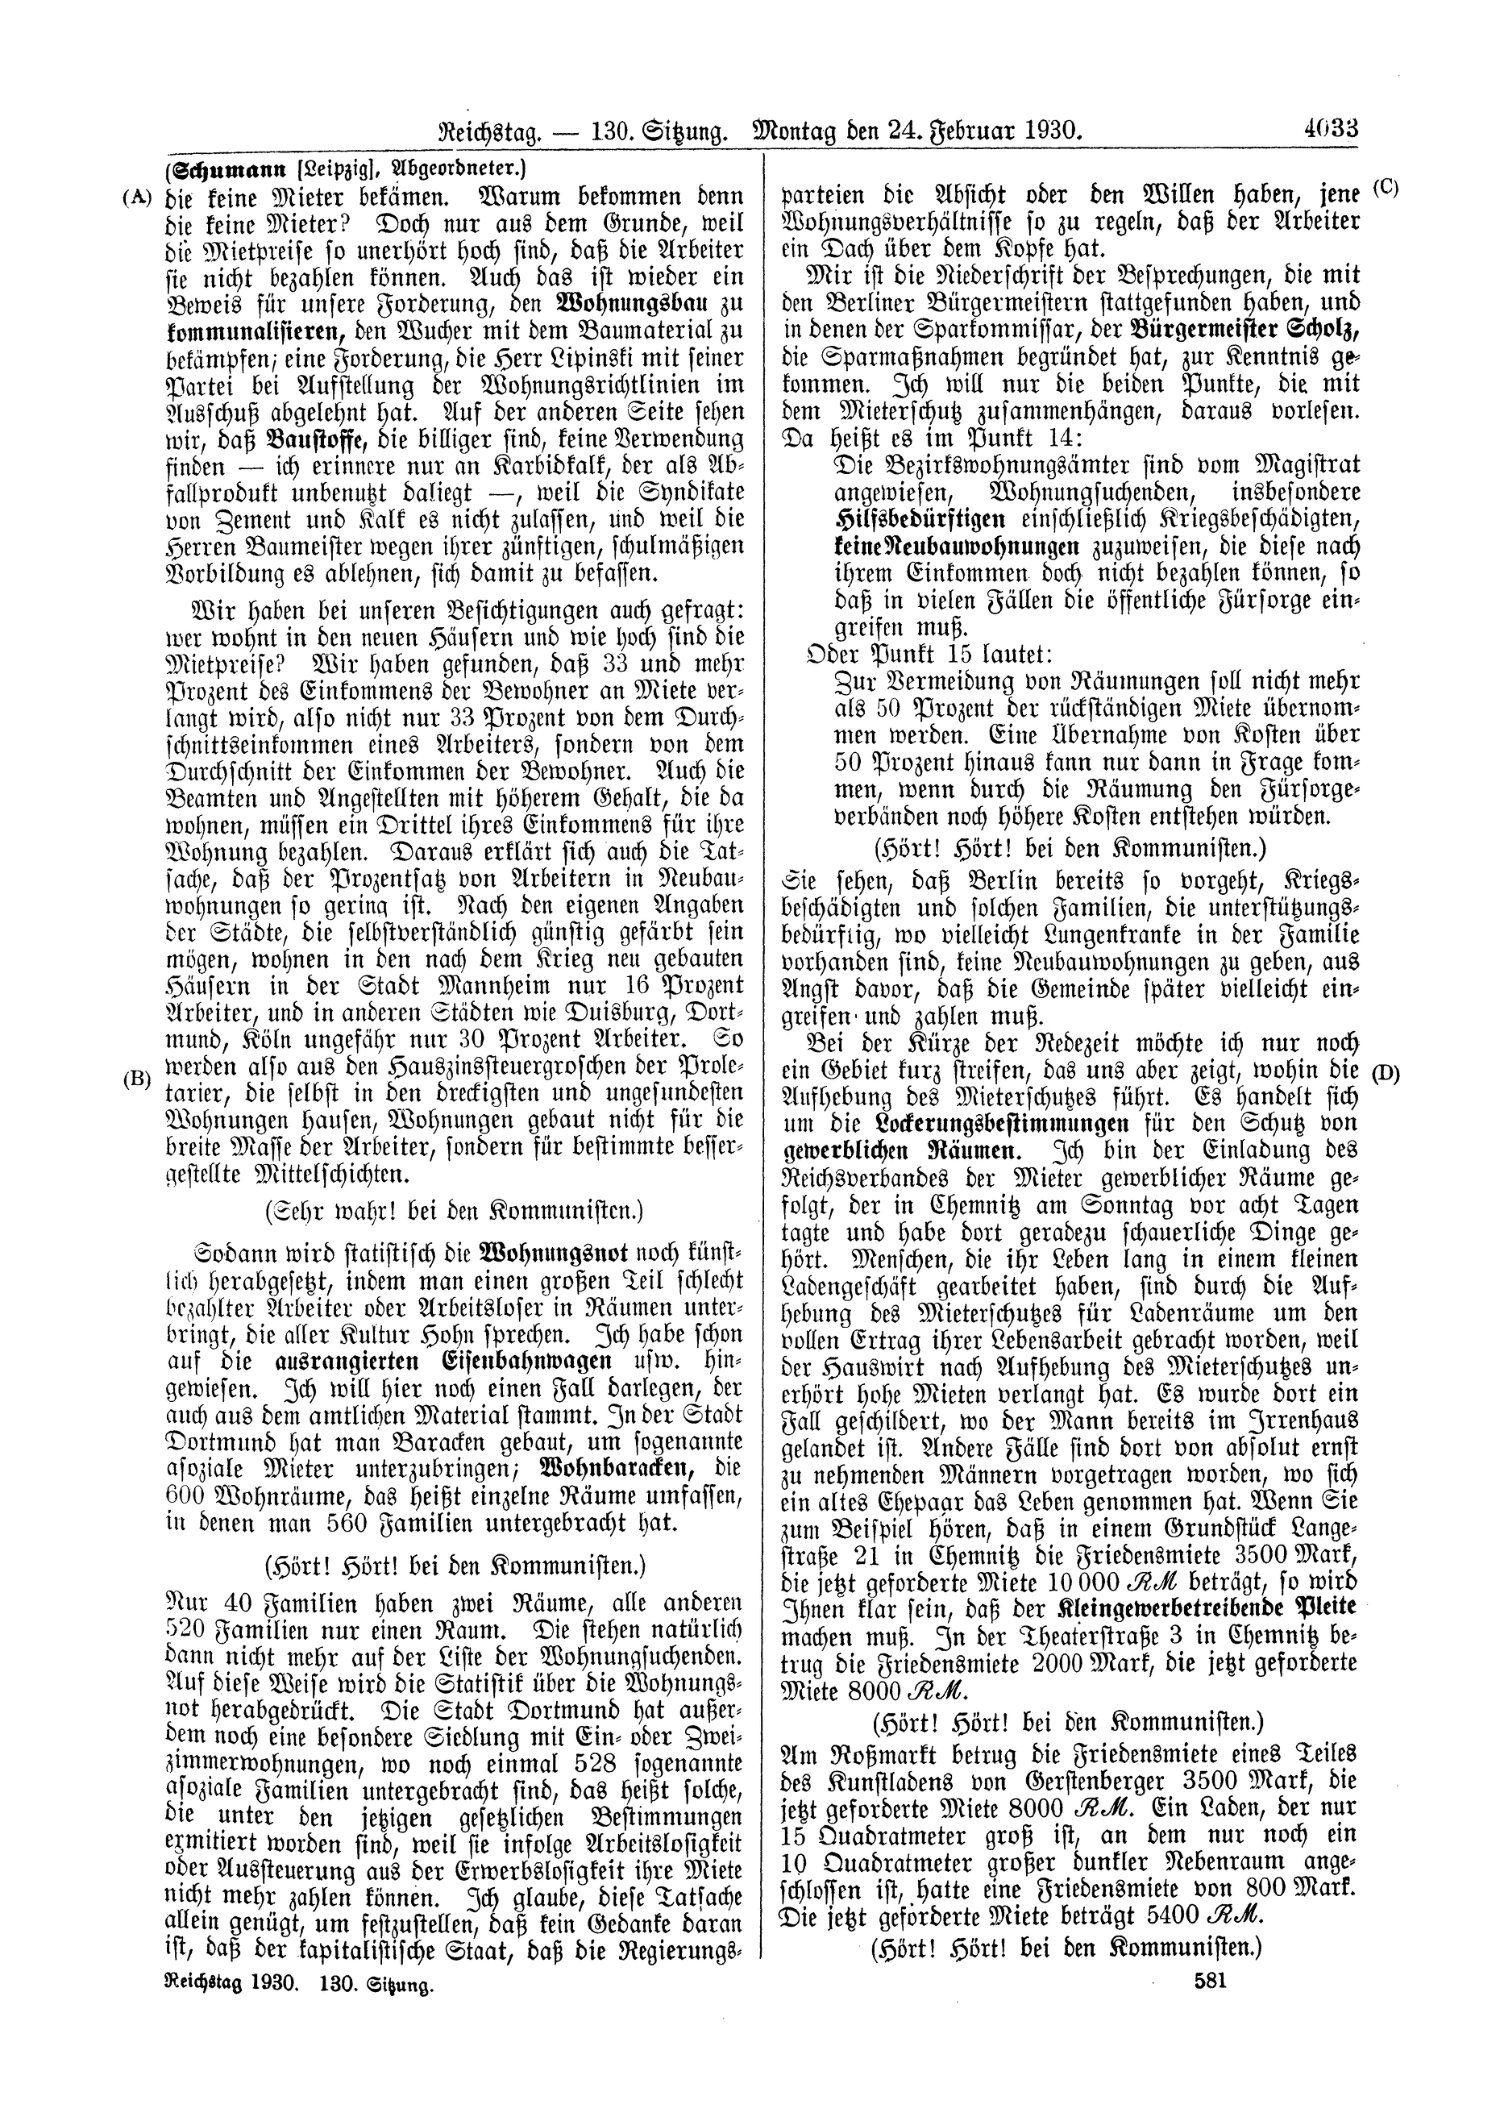 Scan of page 4033